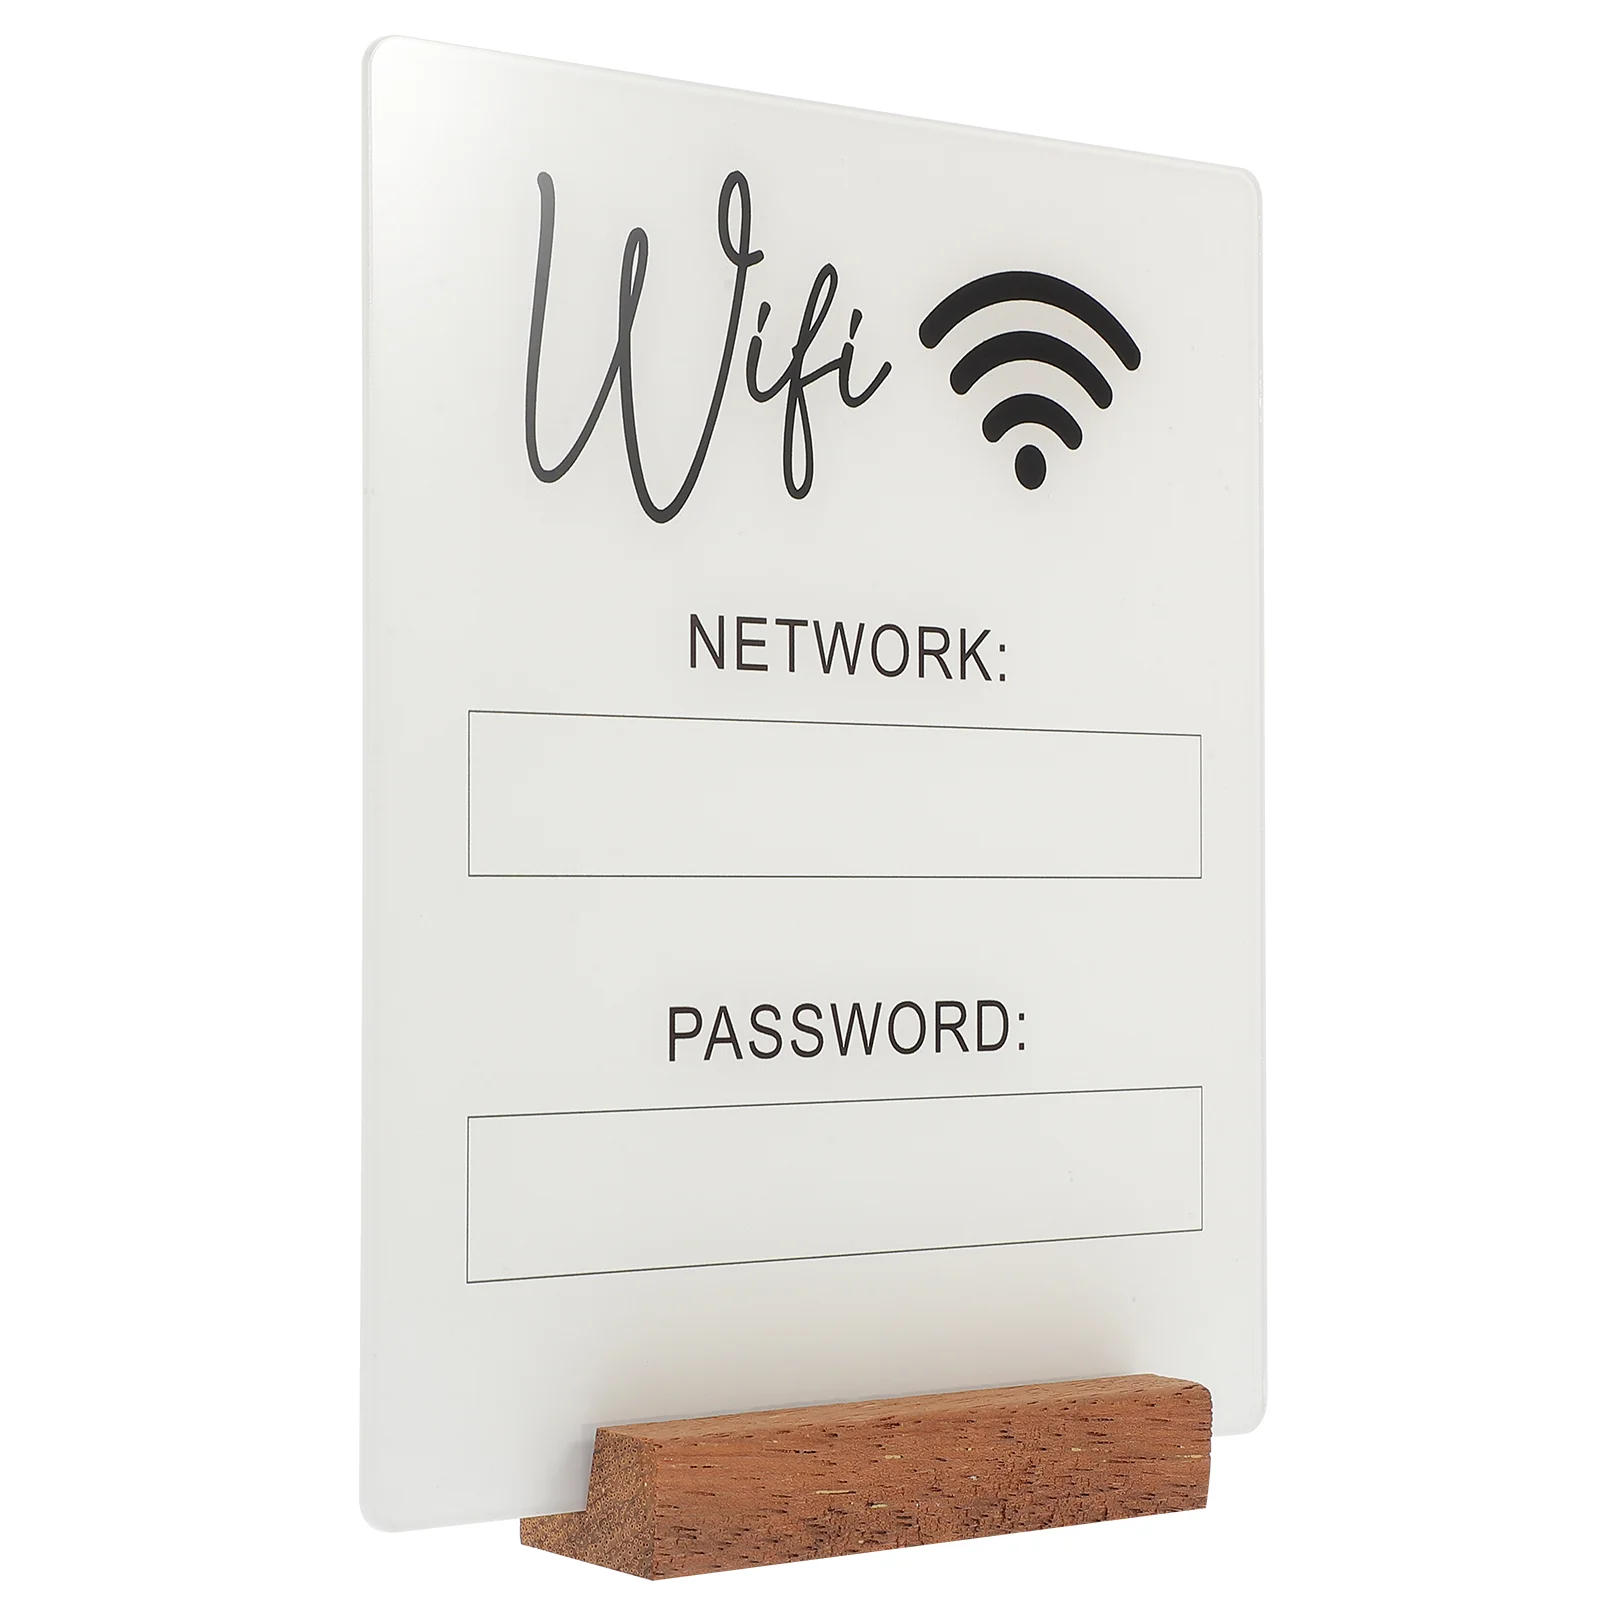 Wifi Password Sign Acrylic Reminder for Guest Room Desk Hotel Guests Stand Office Decor anime takt op destiny figure stand 21cm card delicacy acrylic stand model plate desk decor standing sign collect prop gifts